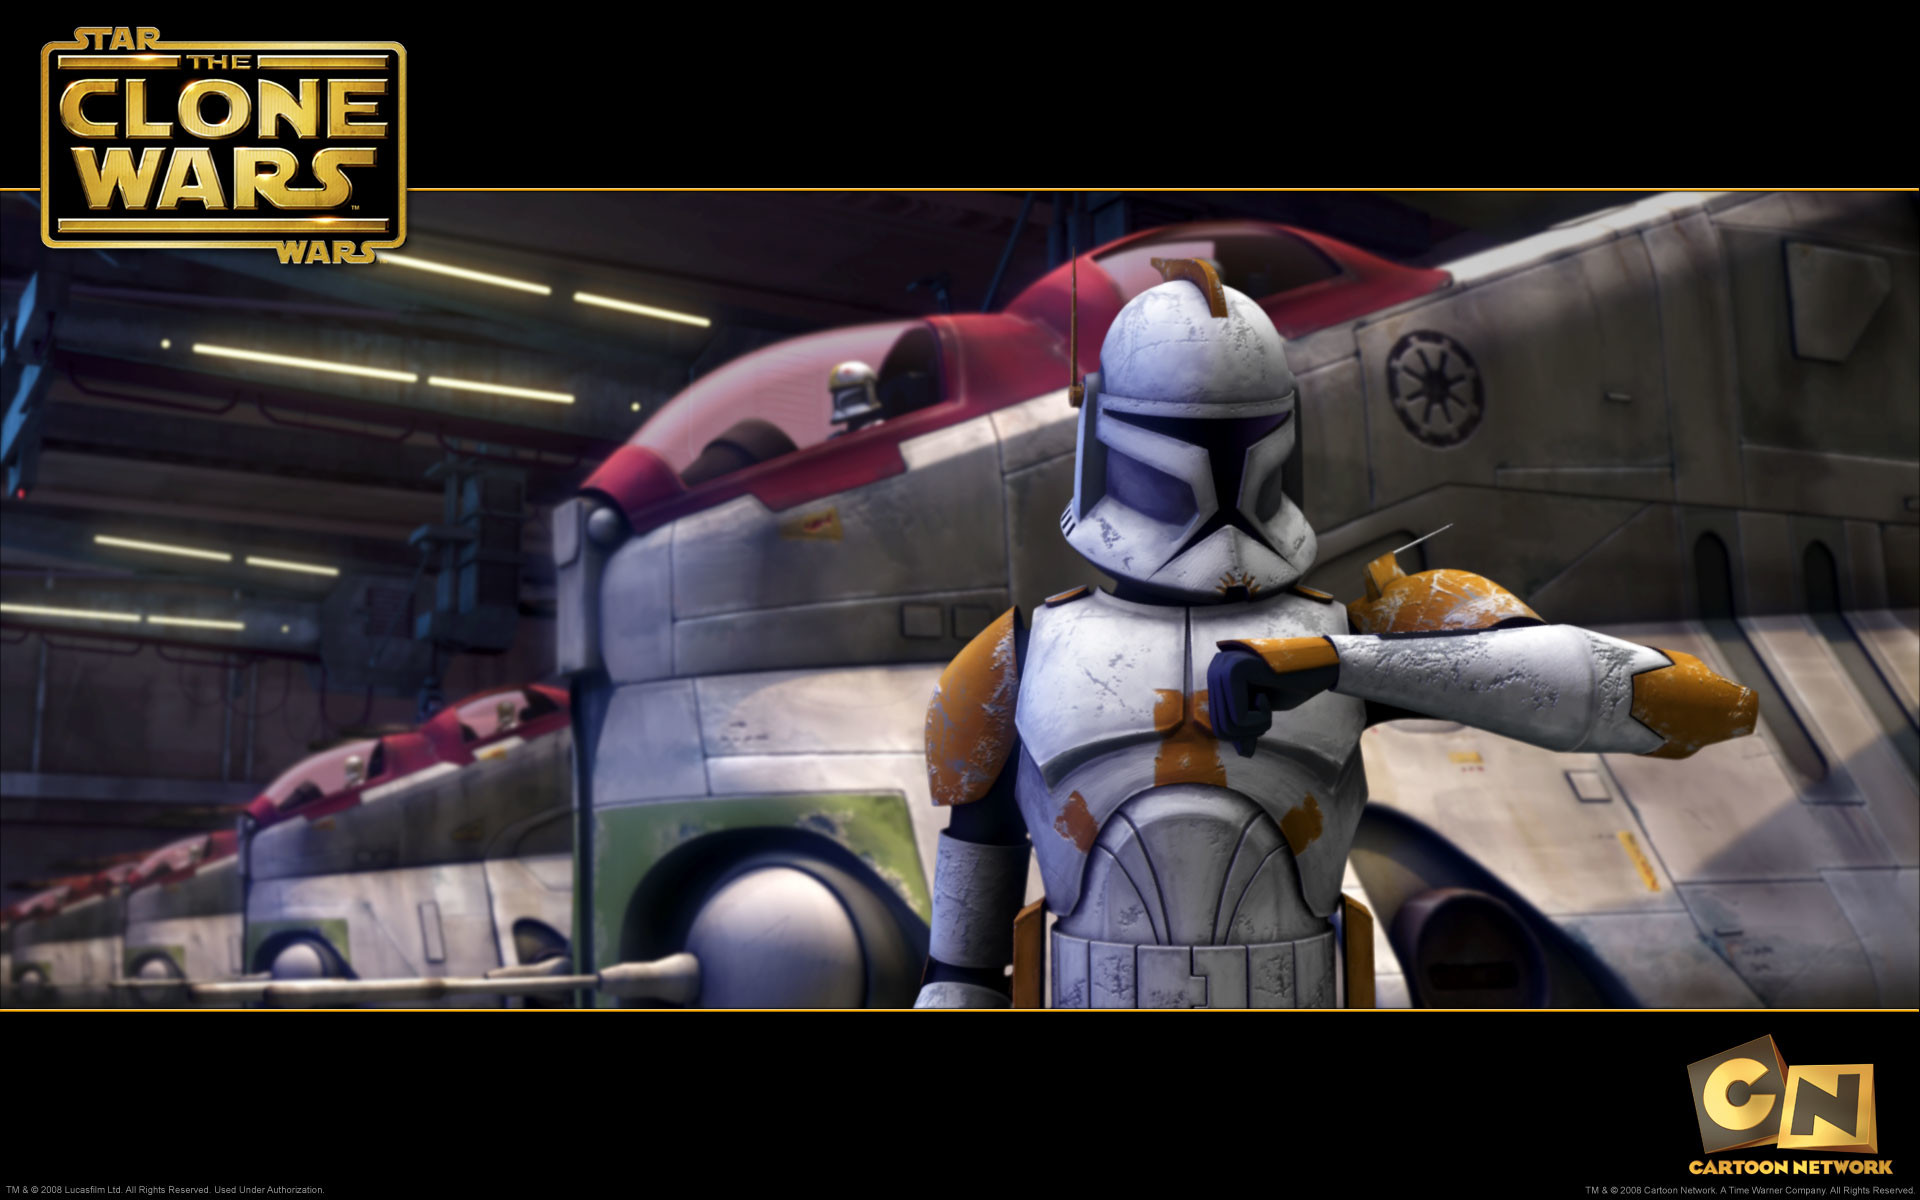 1920x1200 wallpaper picture of commander cody in armor